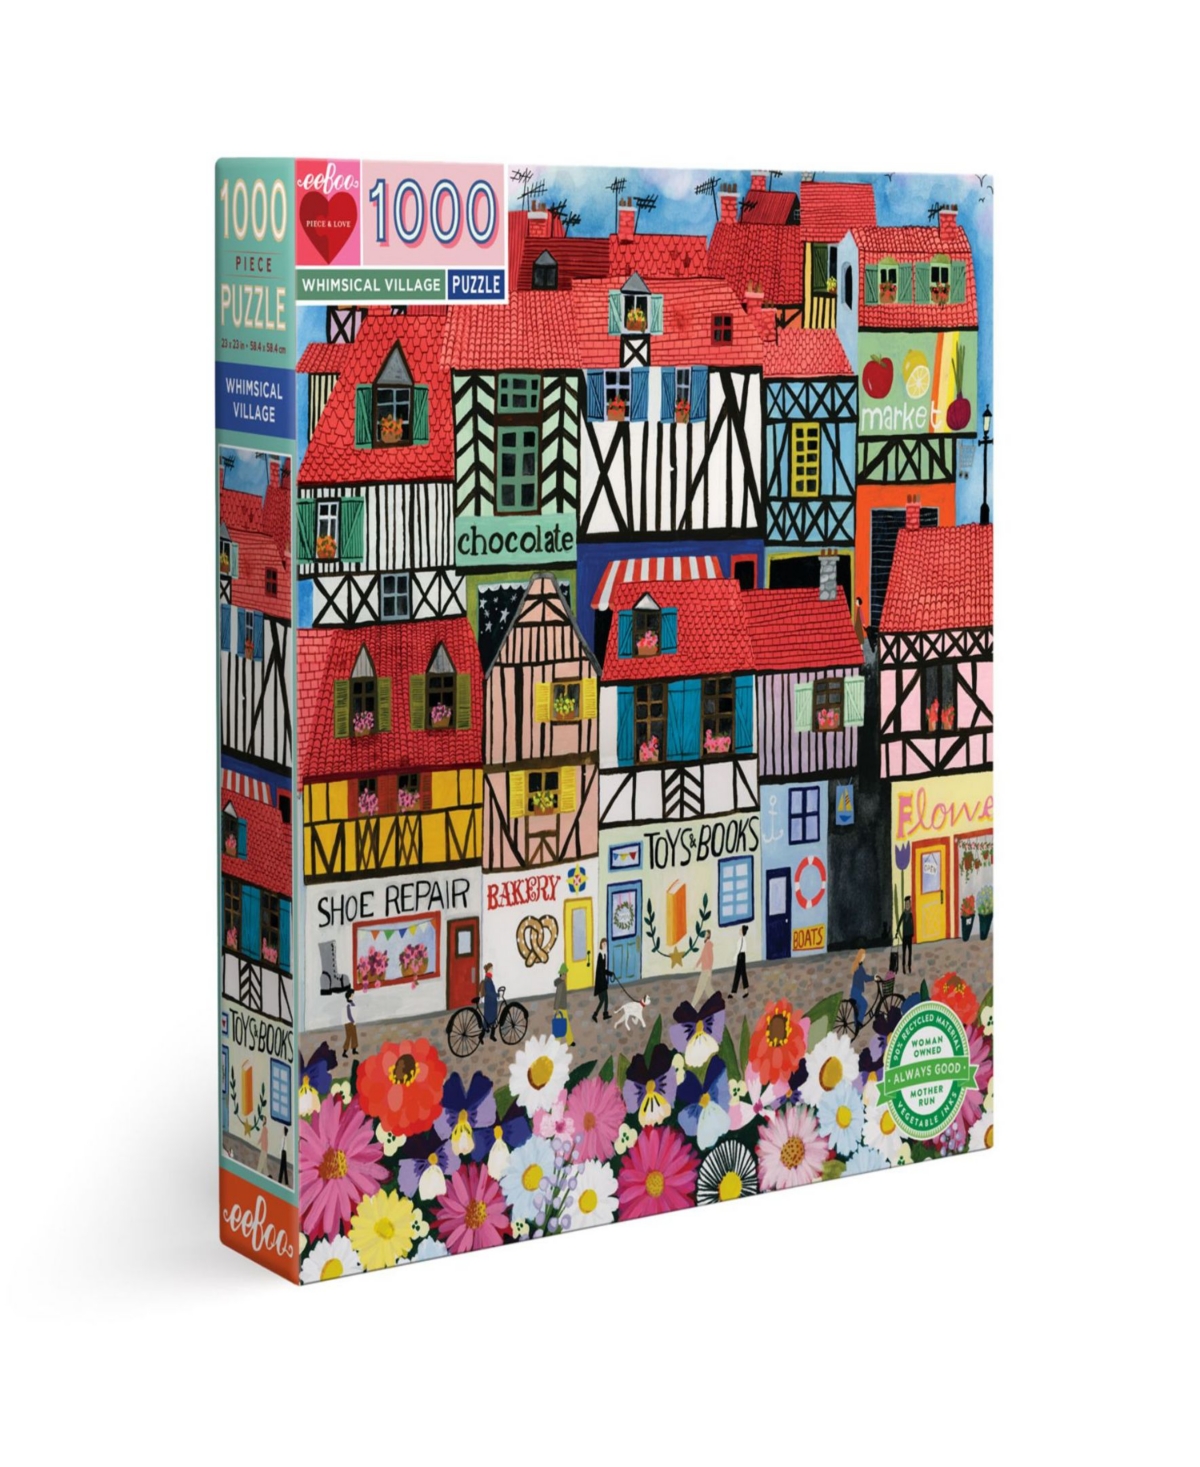 Eeboo Piece And Love Whimsical Village Square Adult Jigsaw Puzzle 1000 Piece Set In Multi